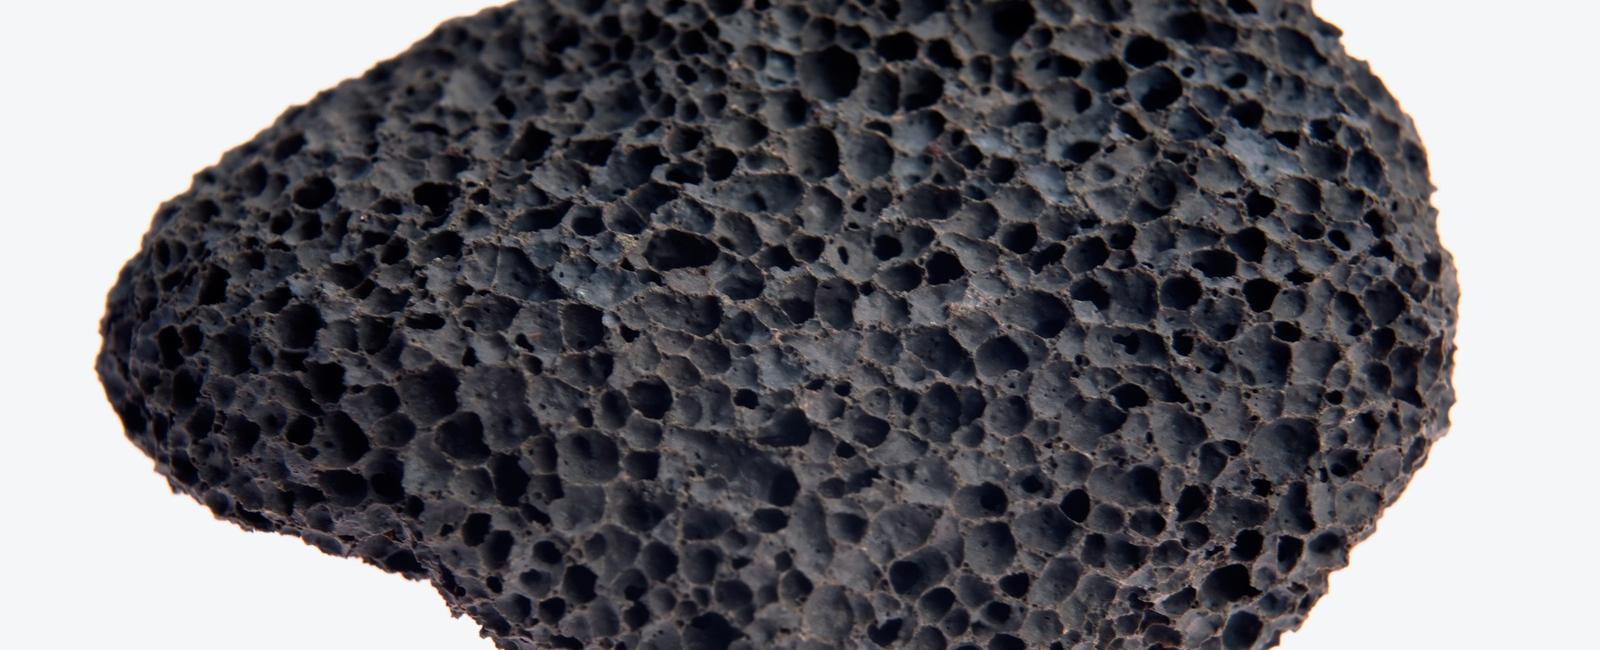 The volcanic rock known as pumice is the only rock that can float in water